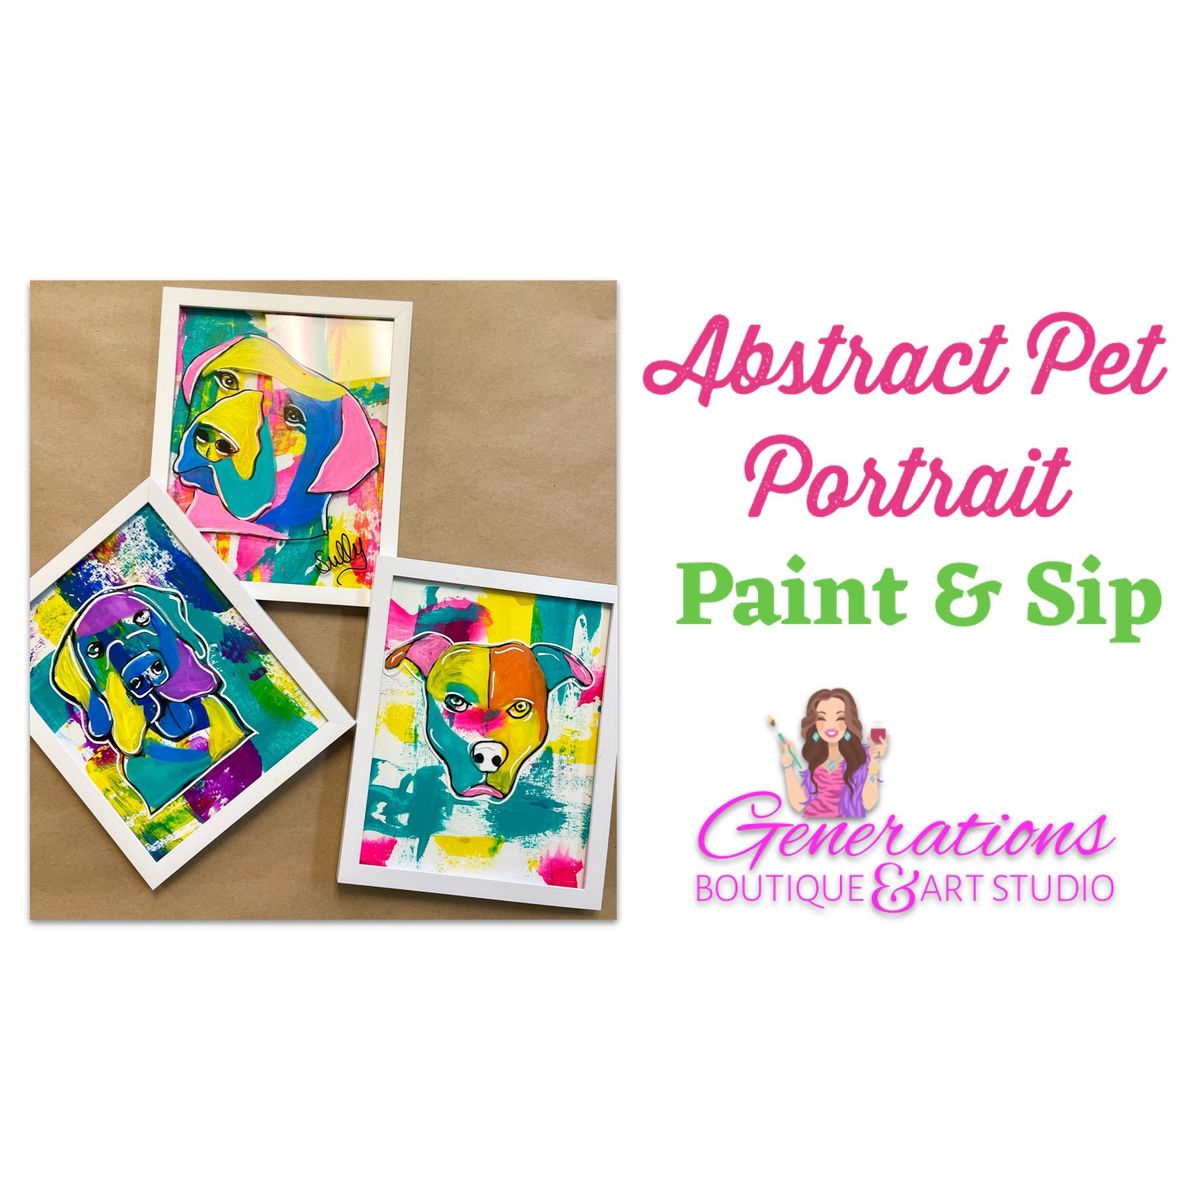 Abstract Pet Portrait Paint and Sip